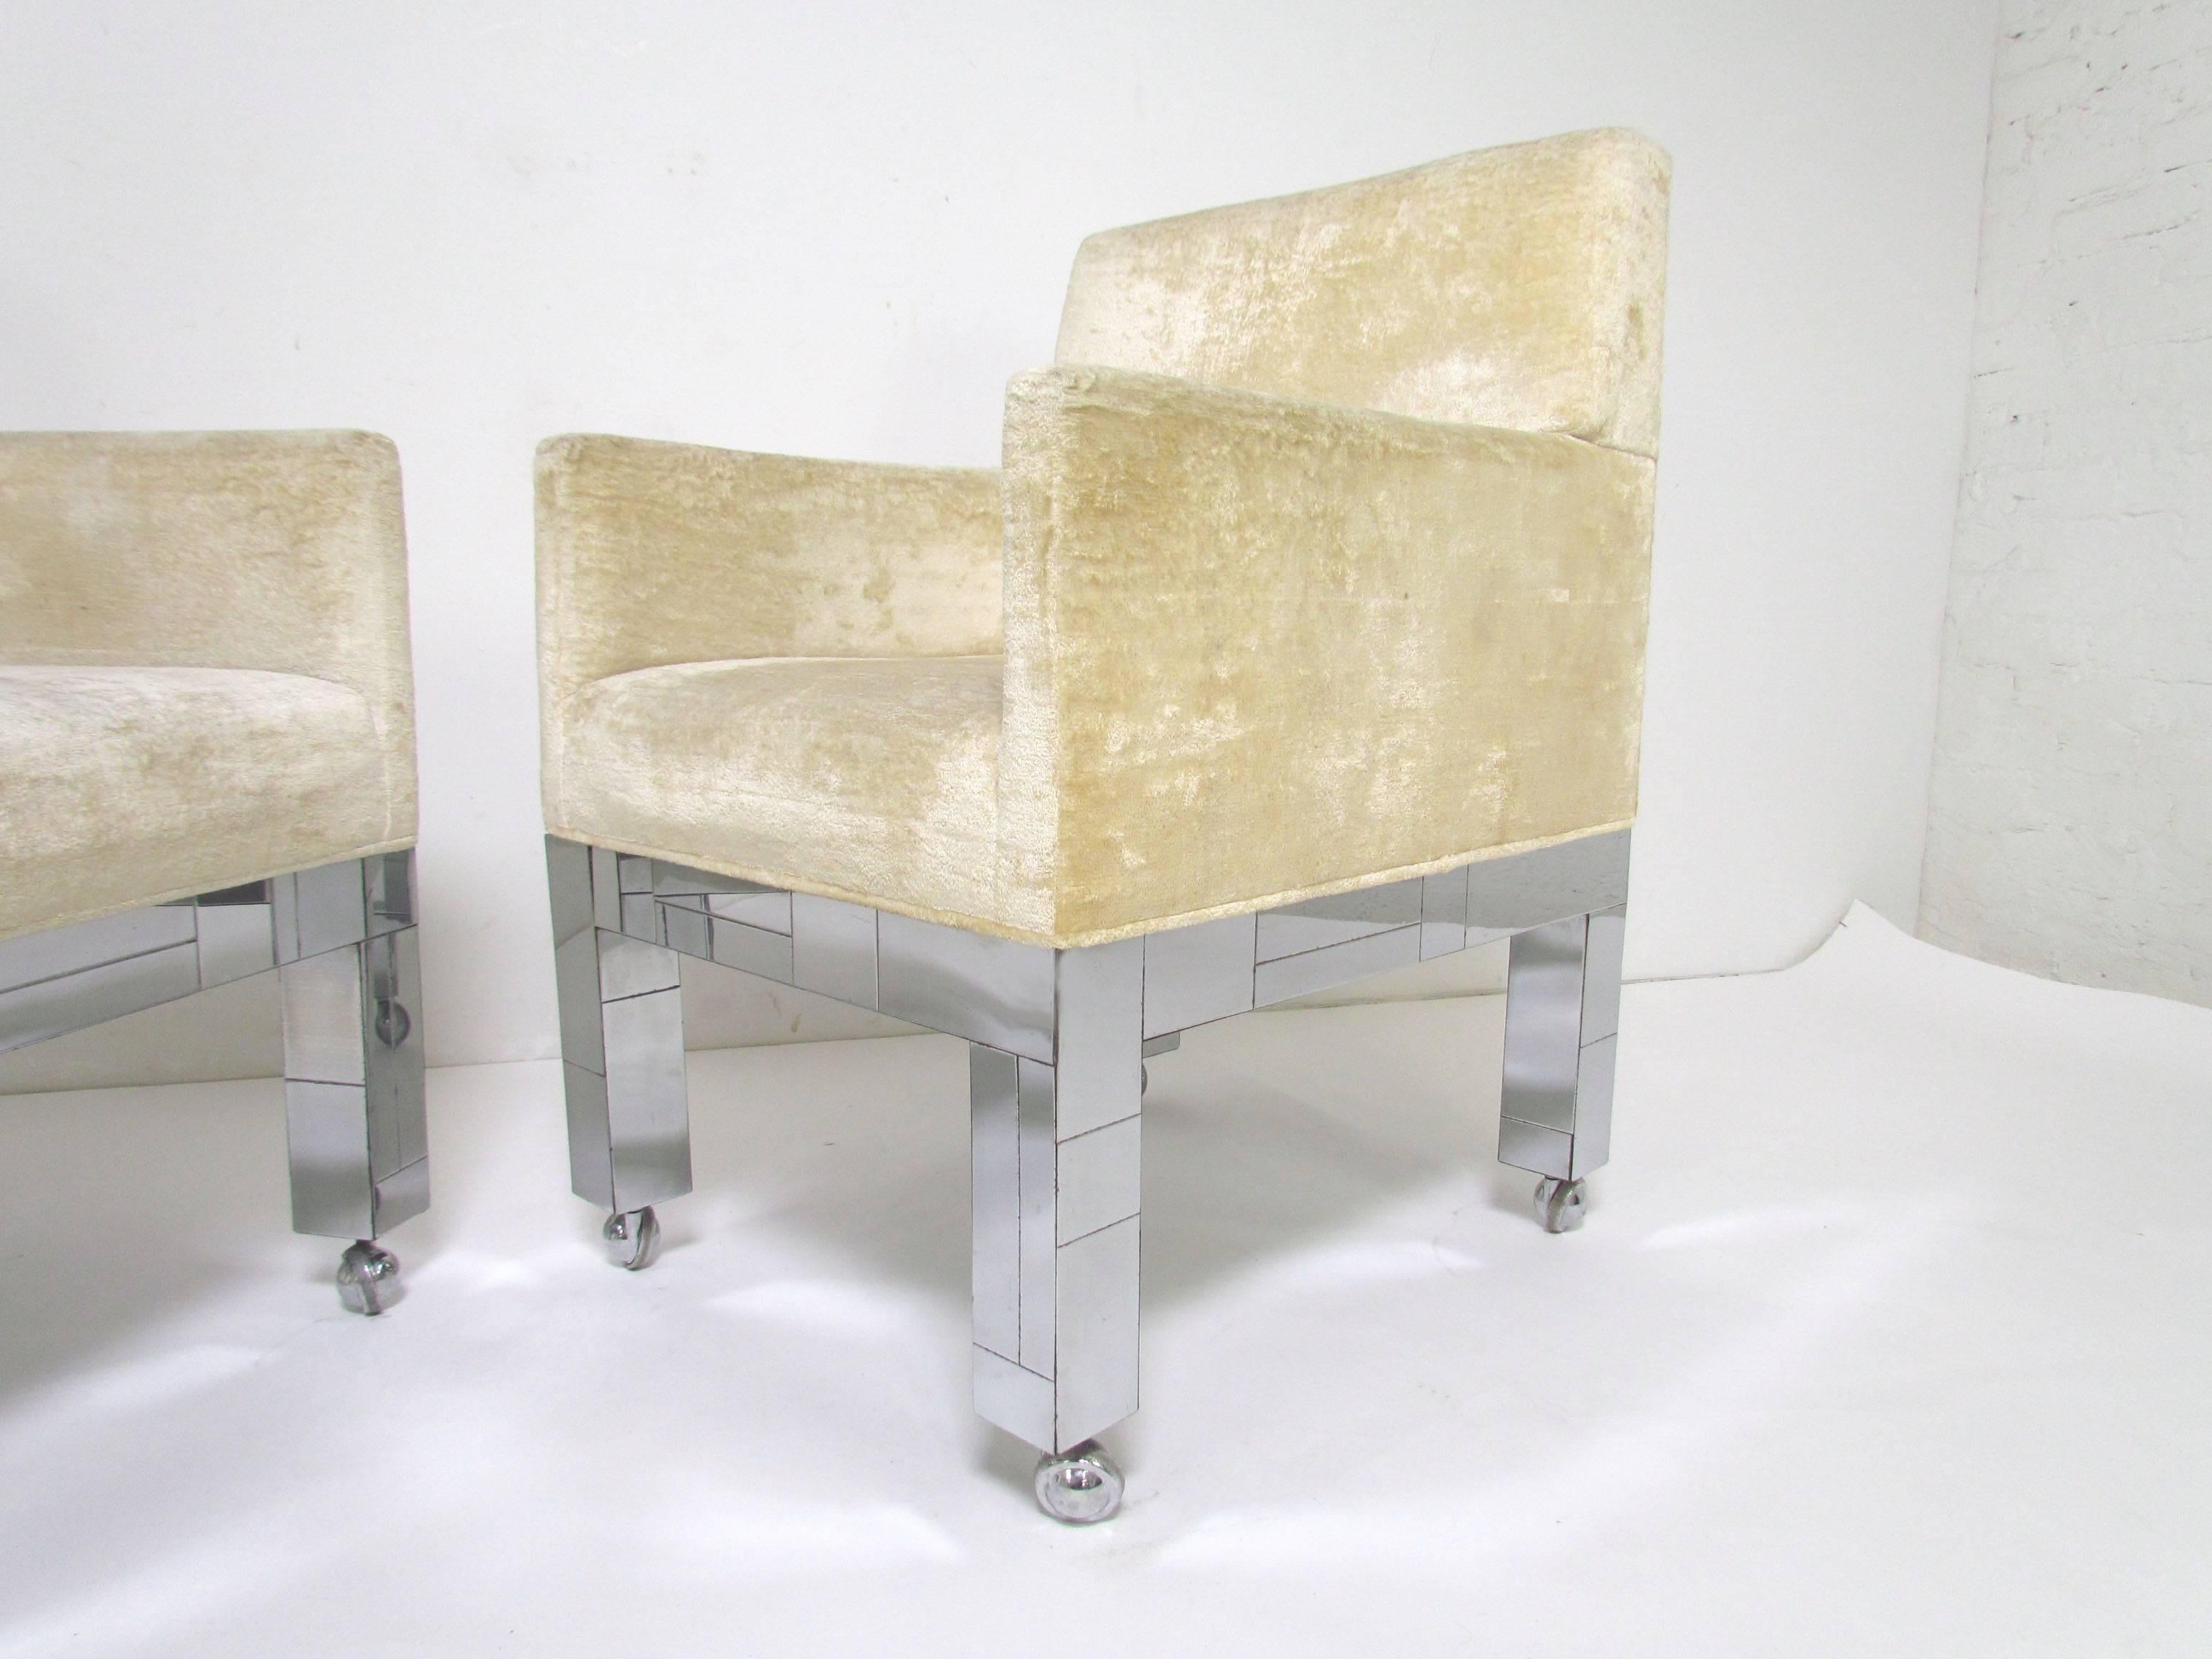 Pair of Cityscape armchairs (model PE-241) with chrome patchwork bases by Paul Evans for Directional, ca. 1970s.  